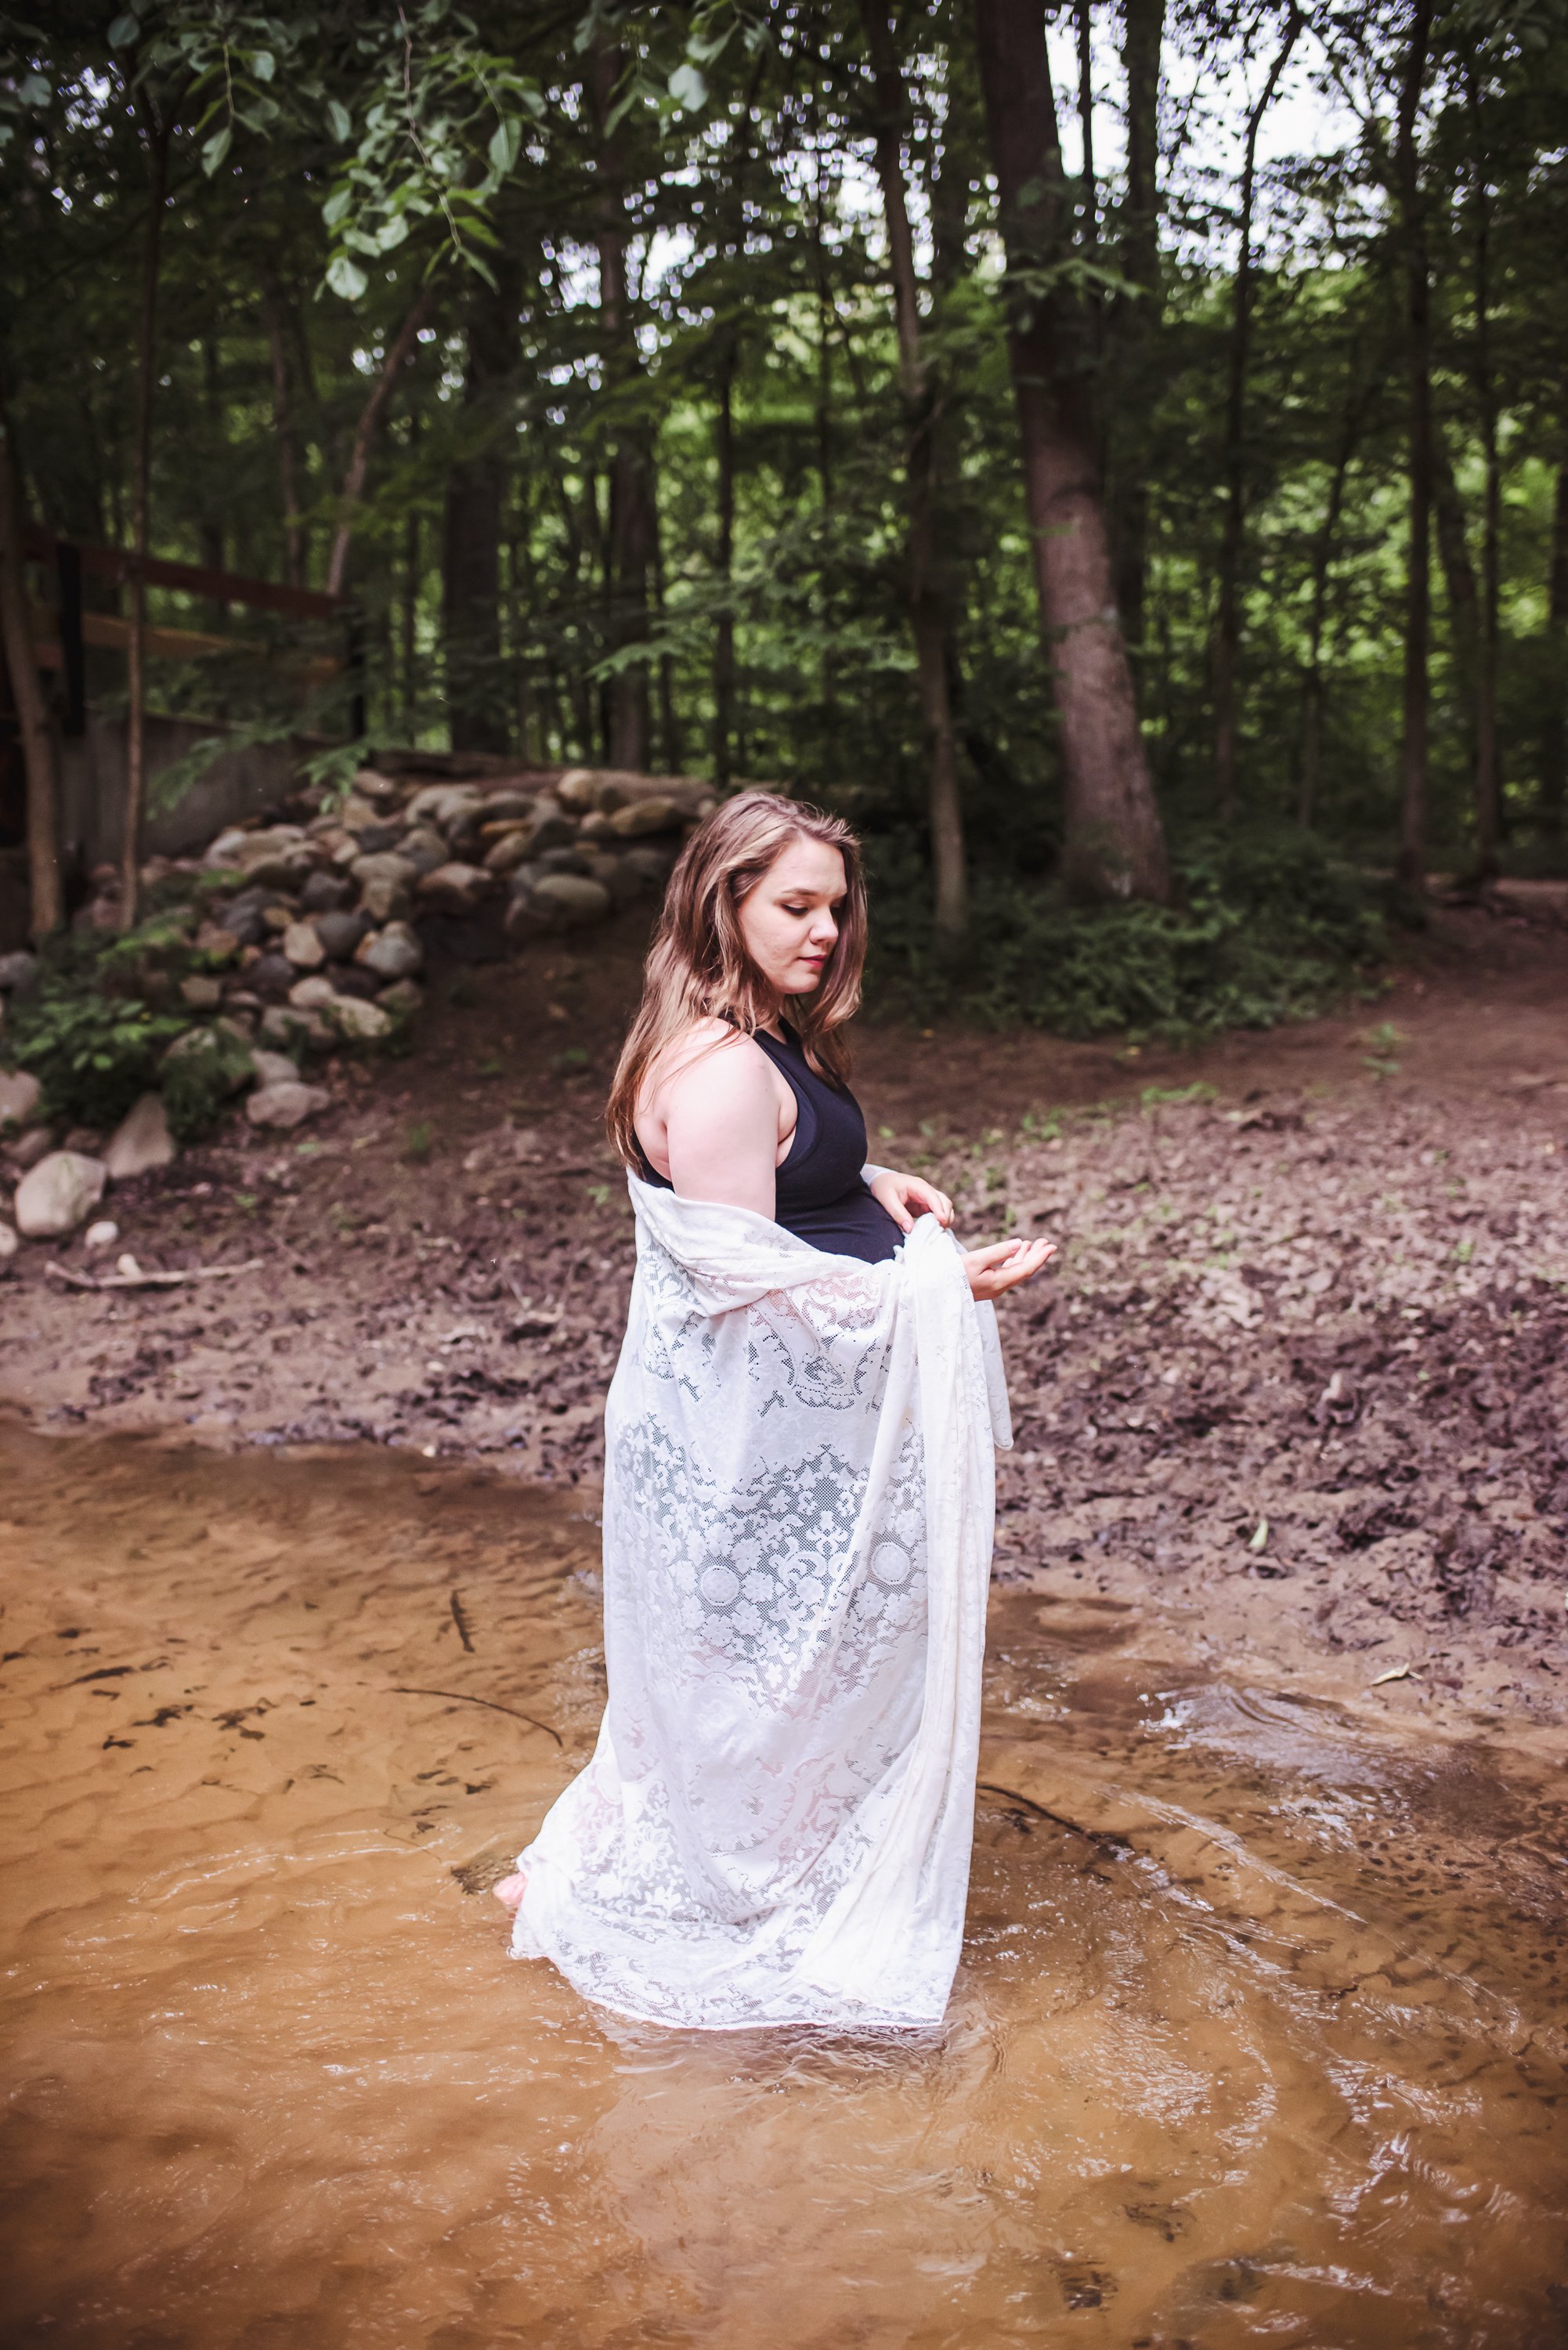 Baby Walker Maternity Session 2022 Randi Armstrong Photography-182.jpg